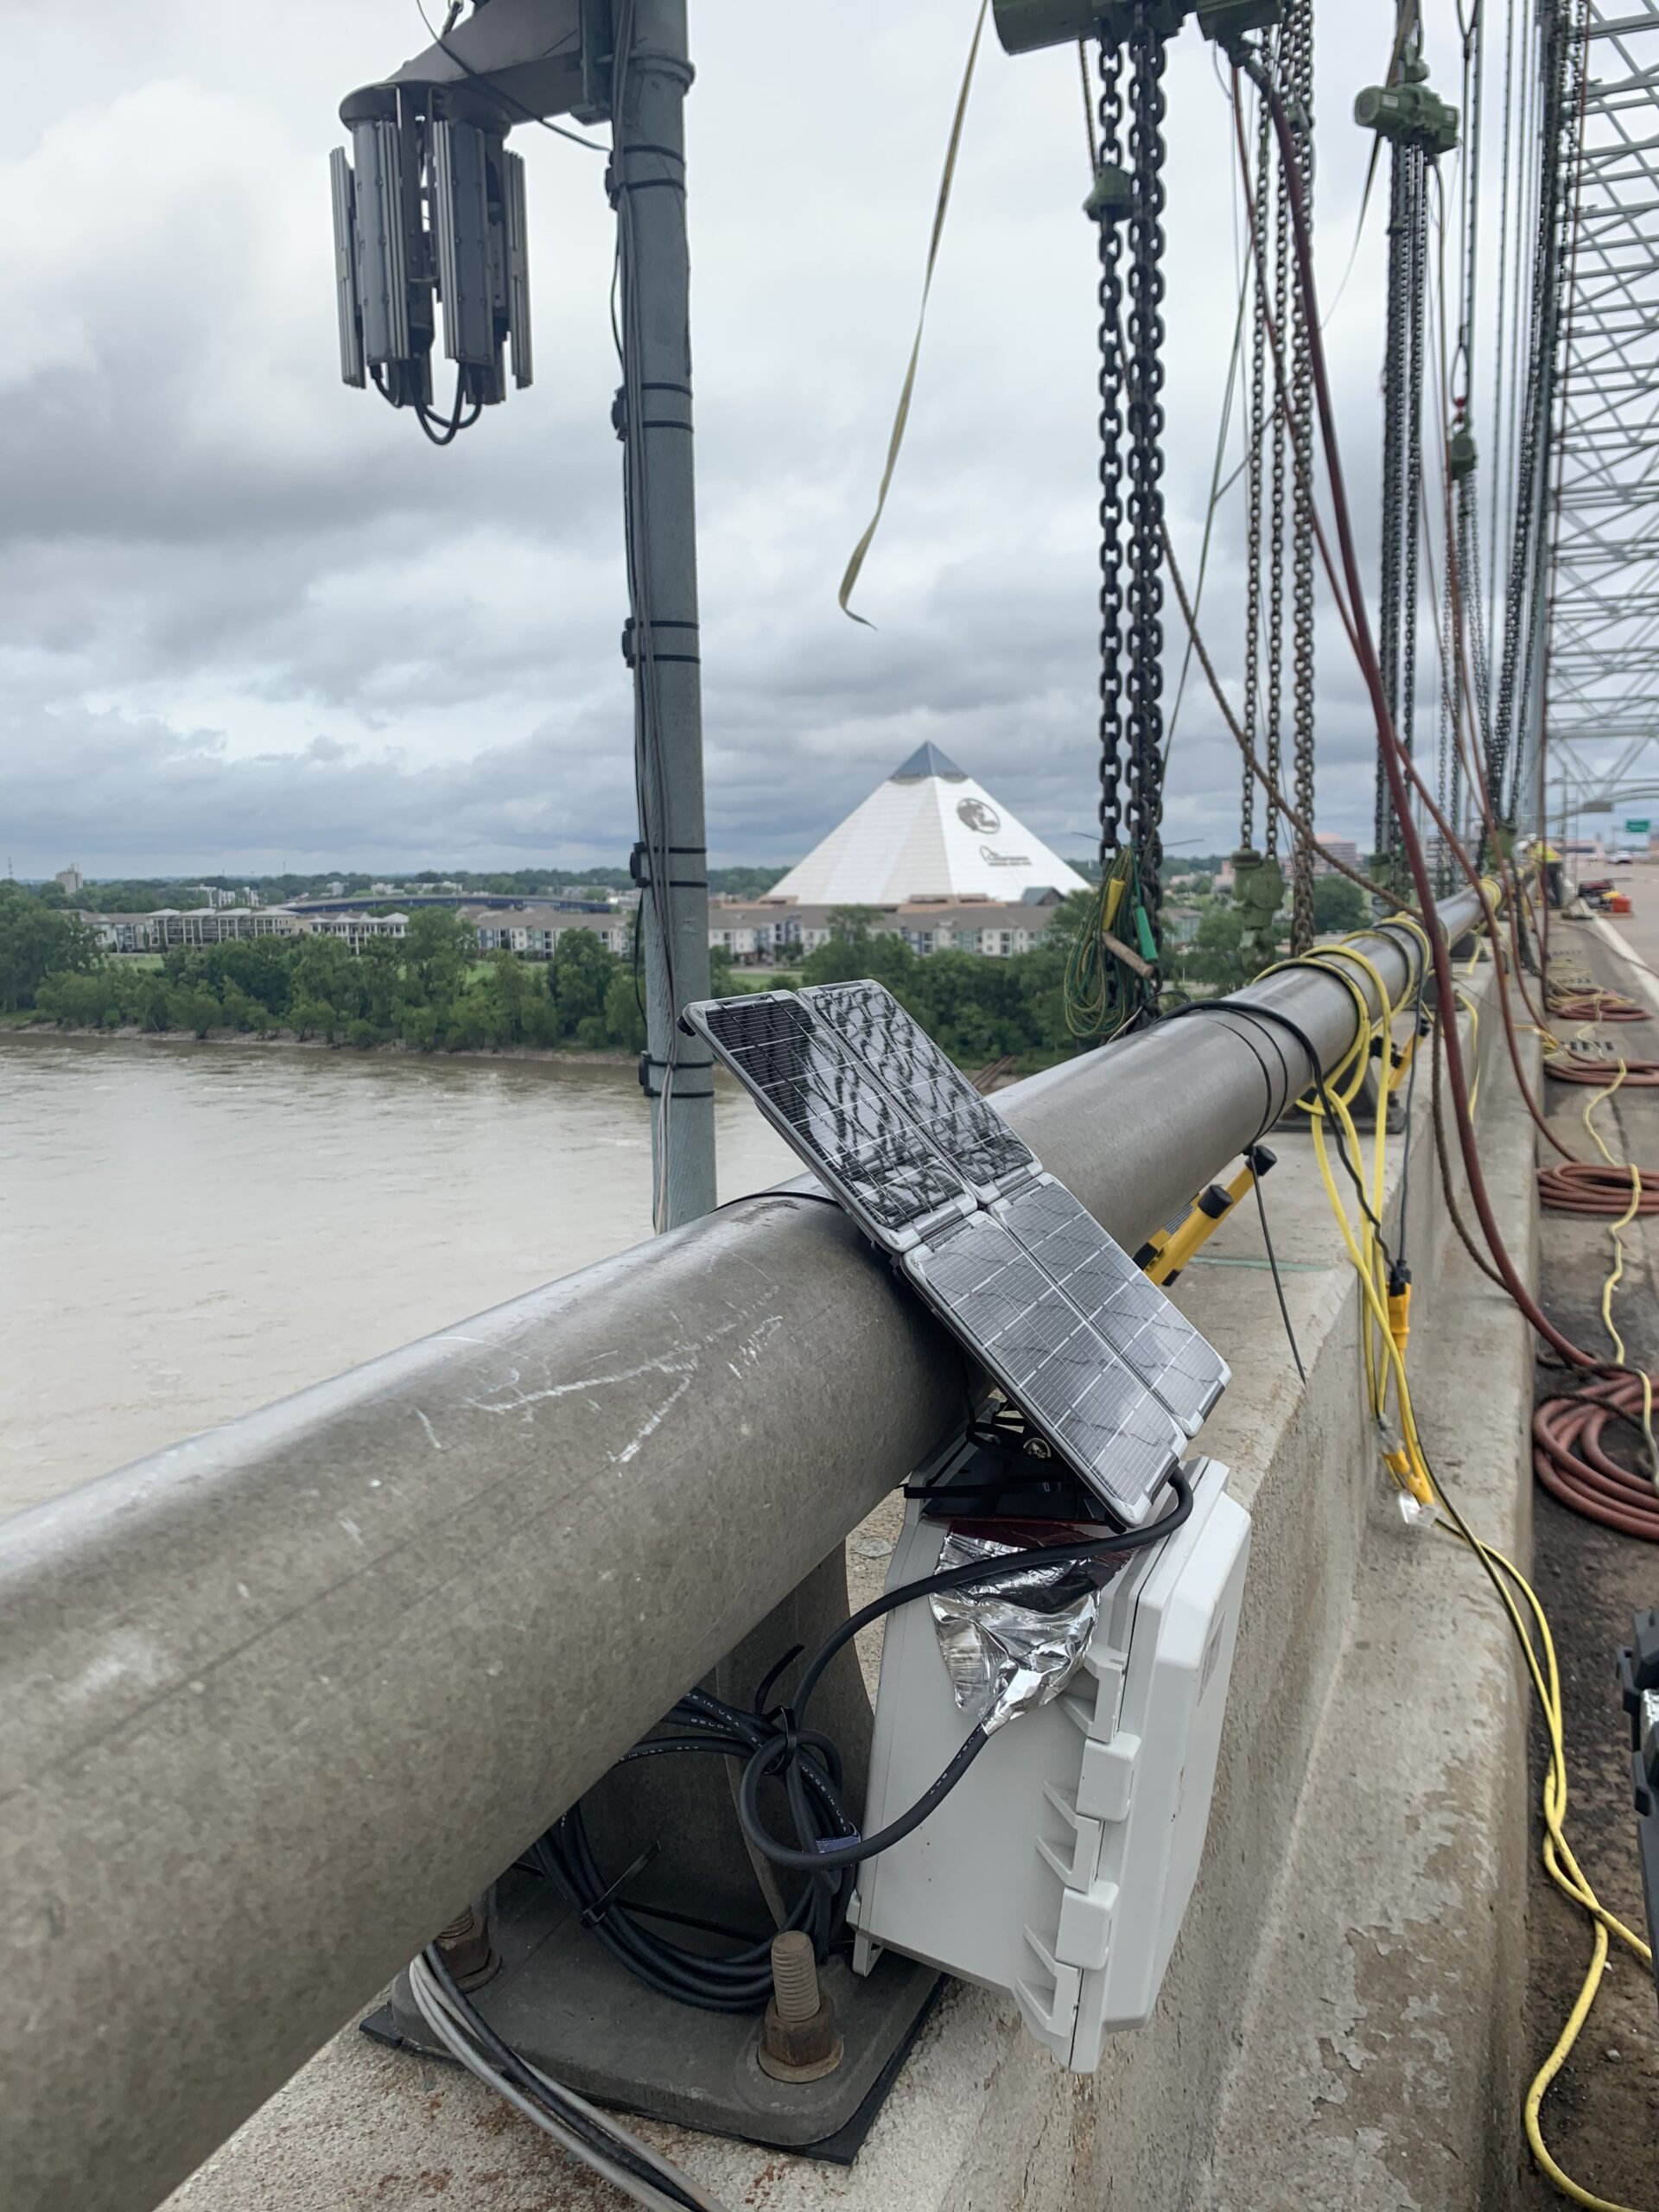 SeniMax (Data Acquisition) on bridge for wireless structural health monitoring I-40 Bridge Detect Cracks Memphis Interstate 40 Bridge Connecting Arkansas and Tennessee